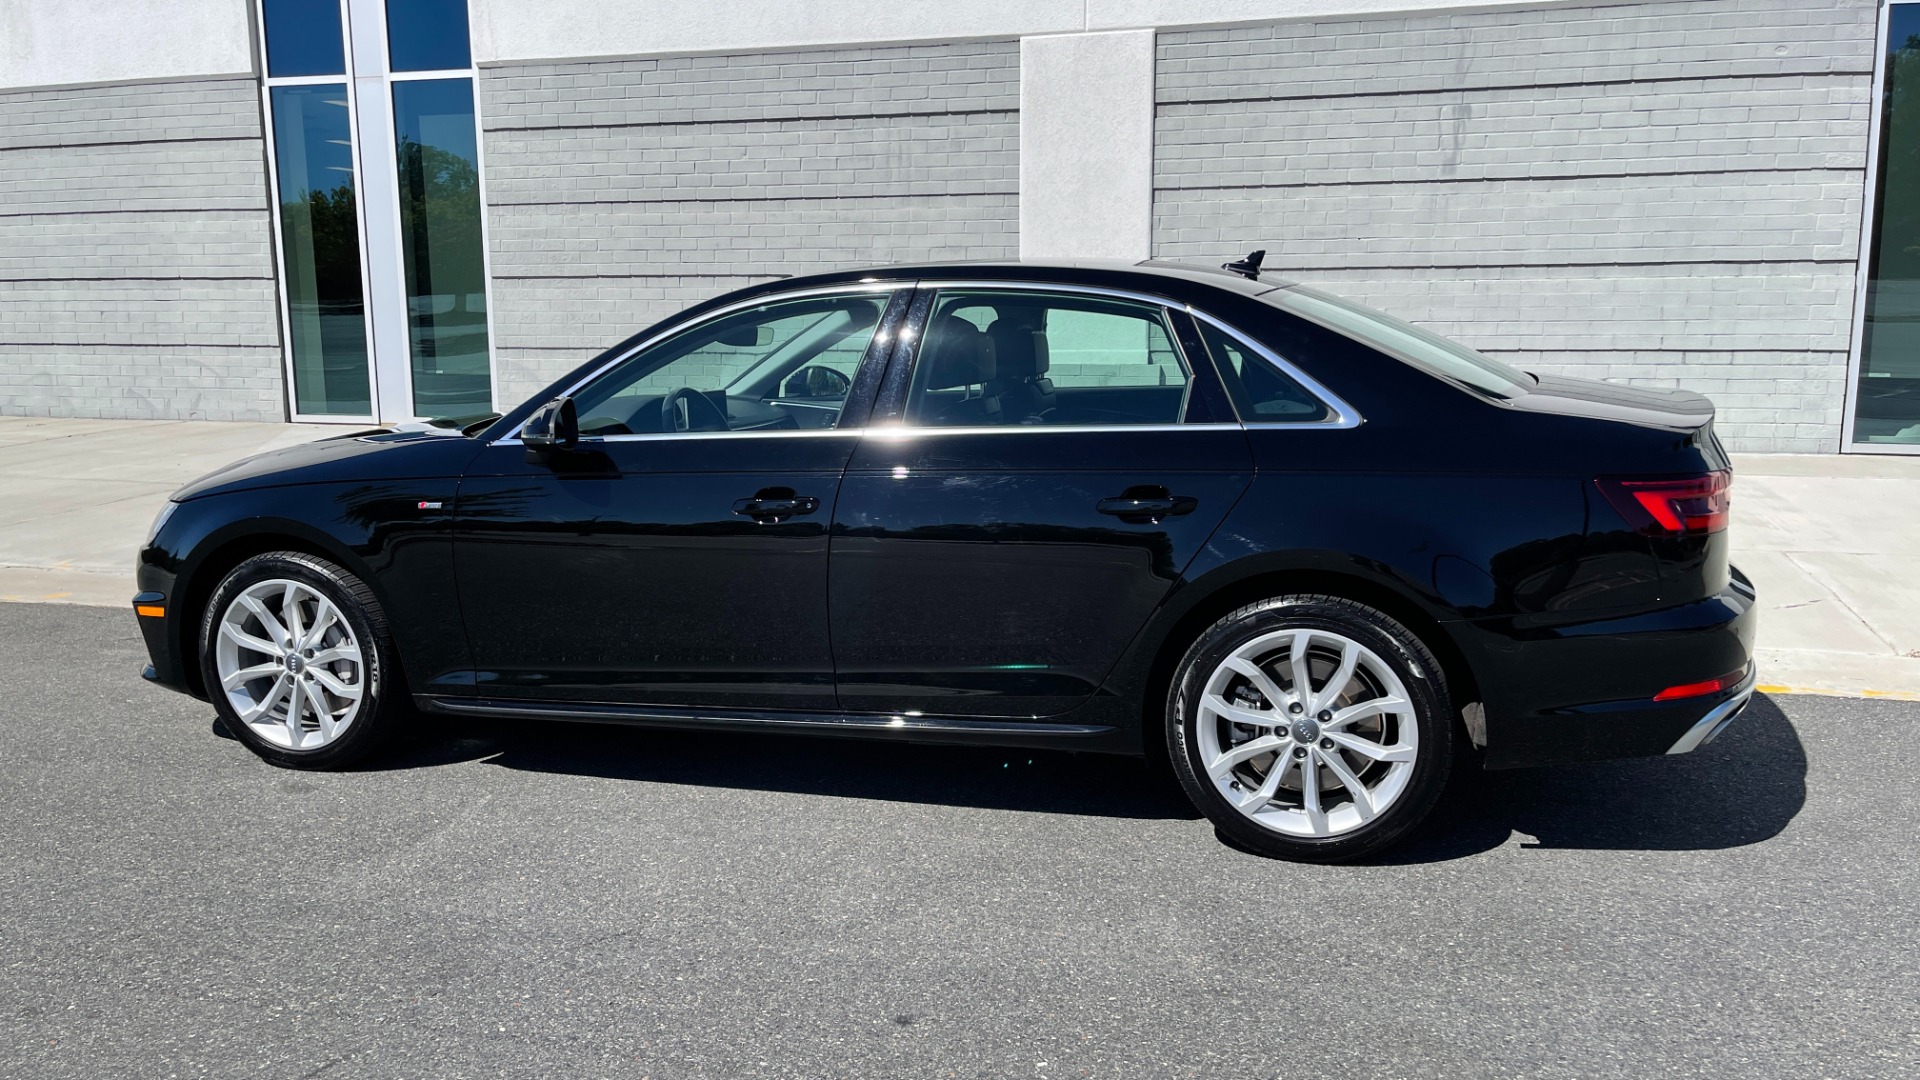 Used 2019 Audi A4 PREMIUM PLUS / COLD WEATHER / AUDI BEAM RINGS / LEATHER / QUATTRO AWD for sale $29,995 at Formula Imports in Charlotte NC 28227 3